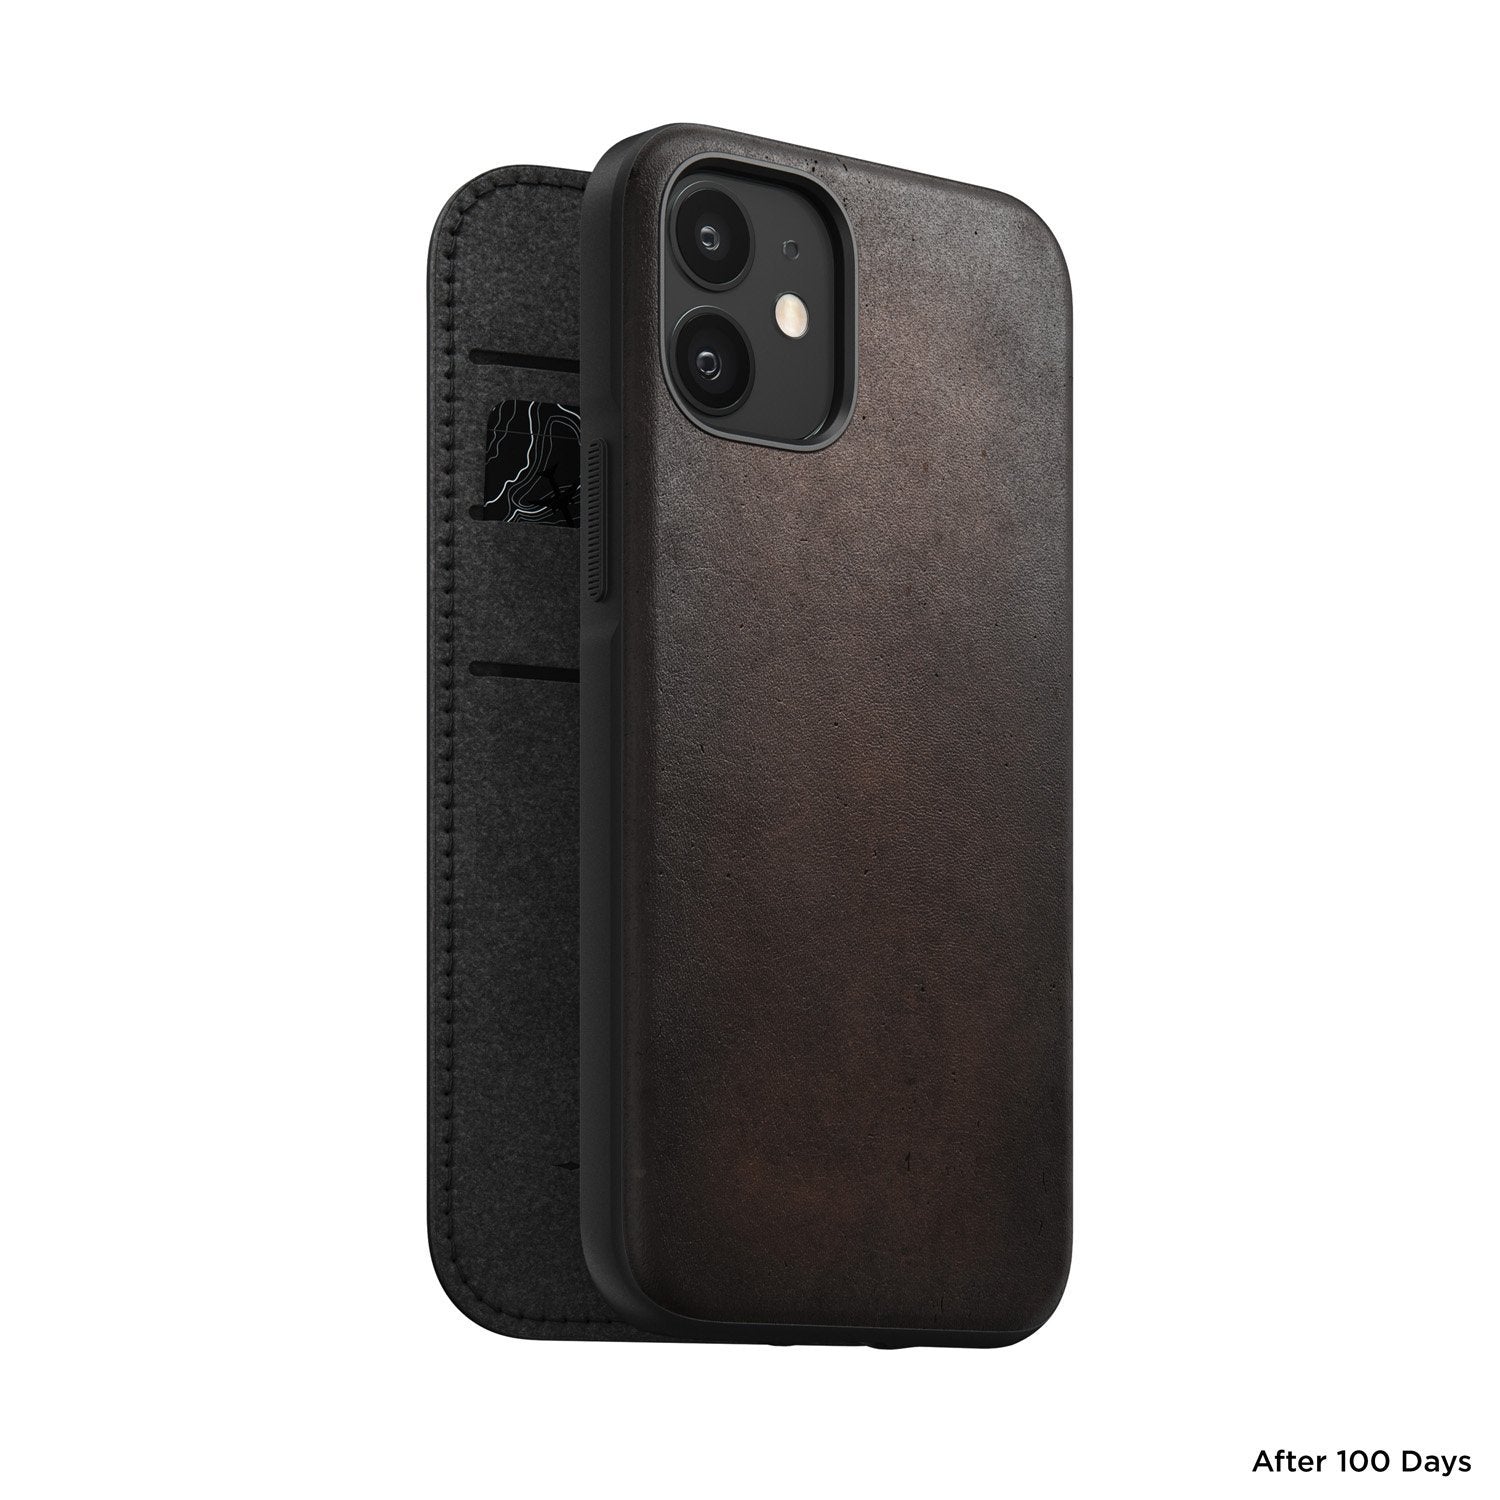 NOMAD Rugged Folio Horween Leather Case for iPhone 12 mini 5.4"(2020), Rustic Brown Default NOMAD 